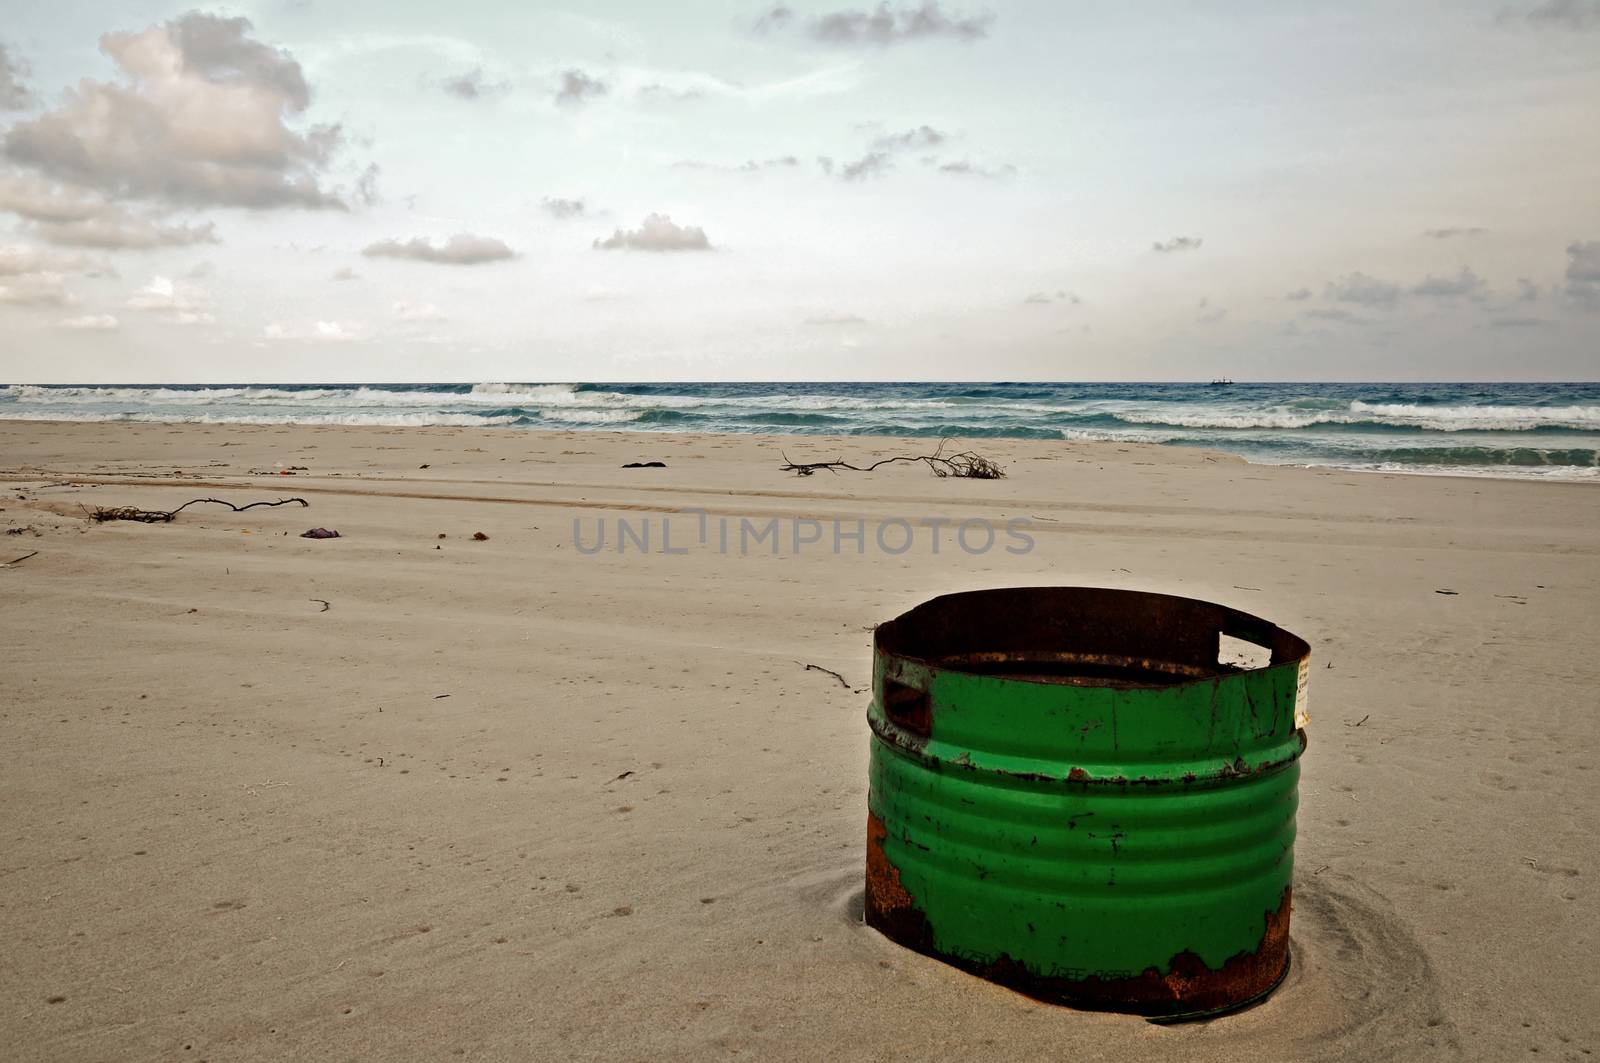 A wonderful tropical beach location with the contrast of abandoned garbage